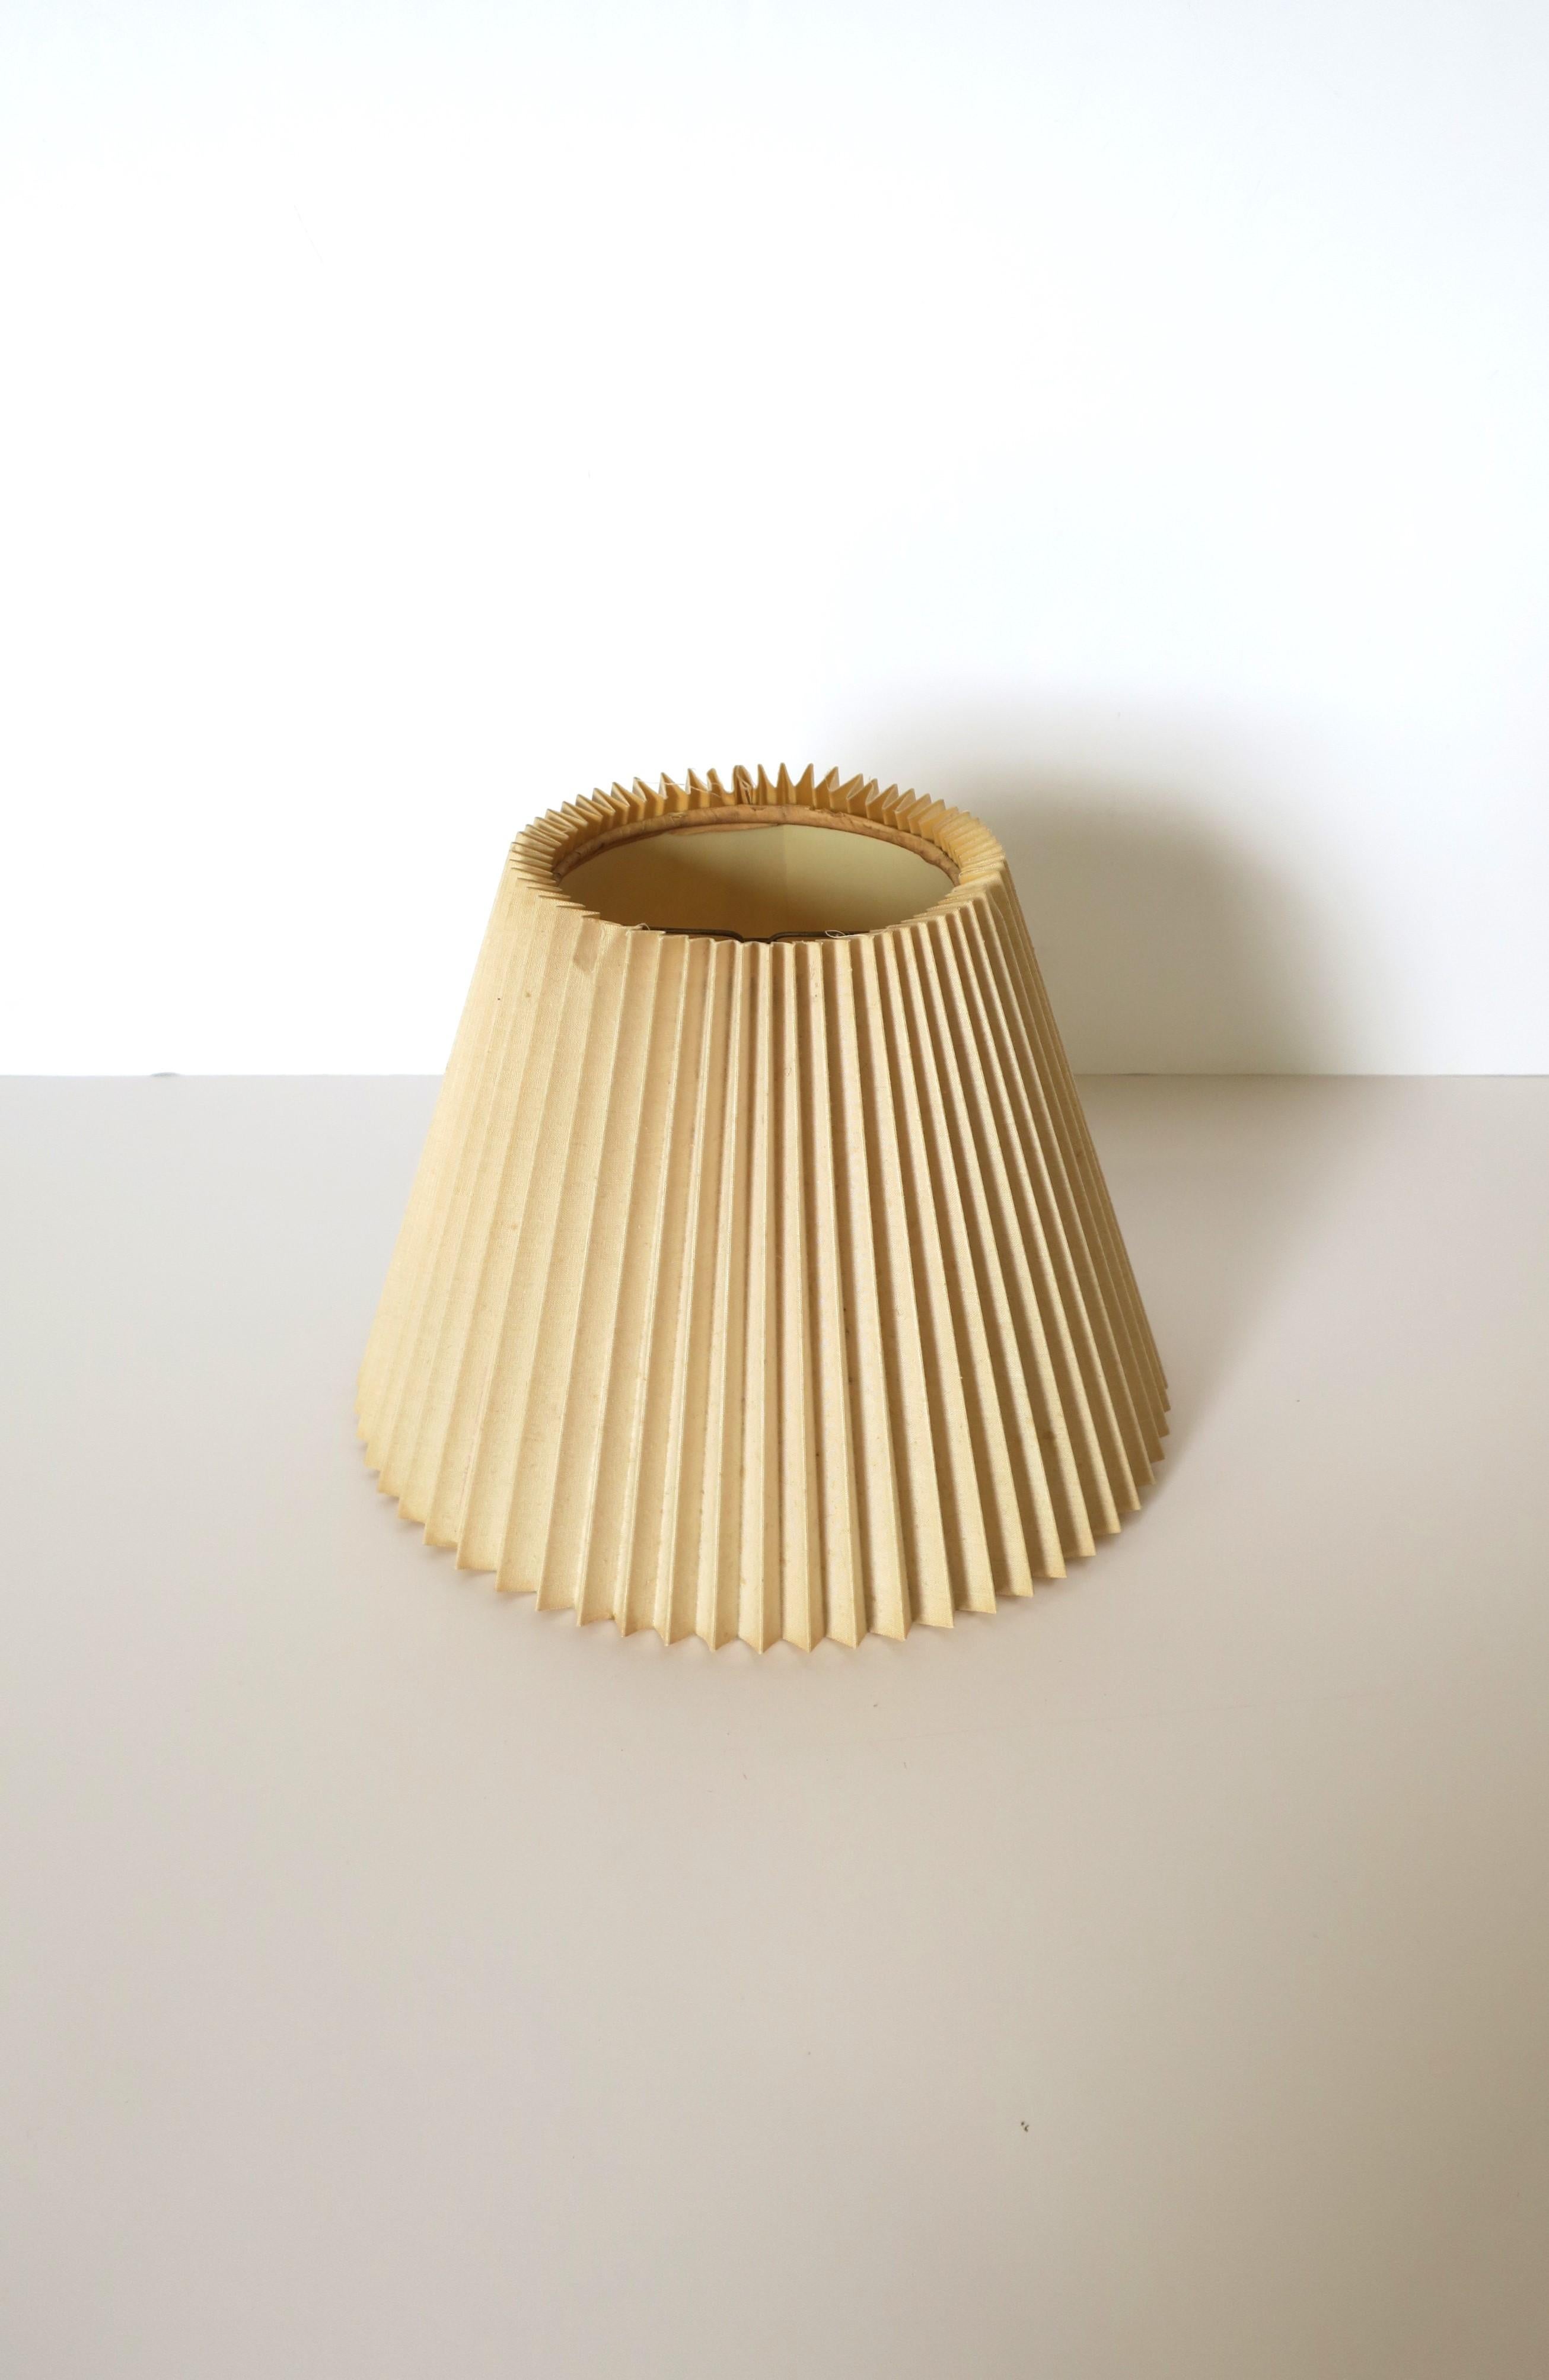 American Pleated Lamp Shade For Sale